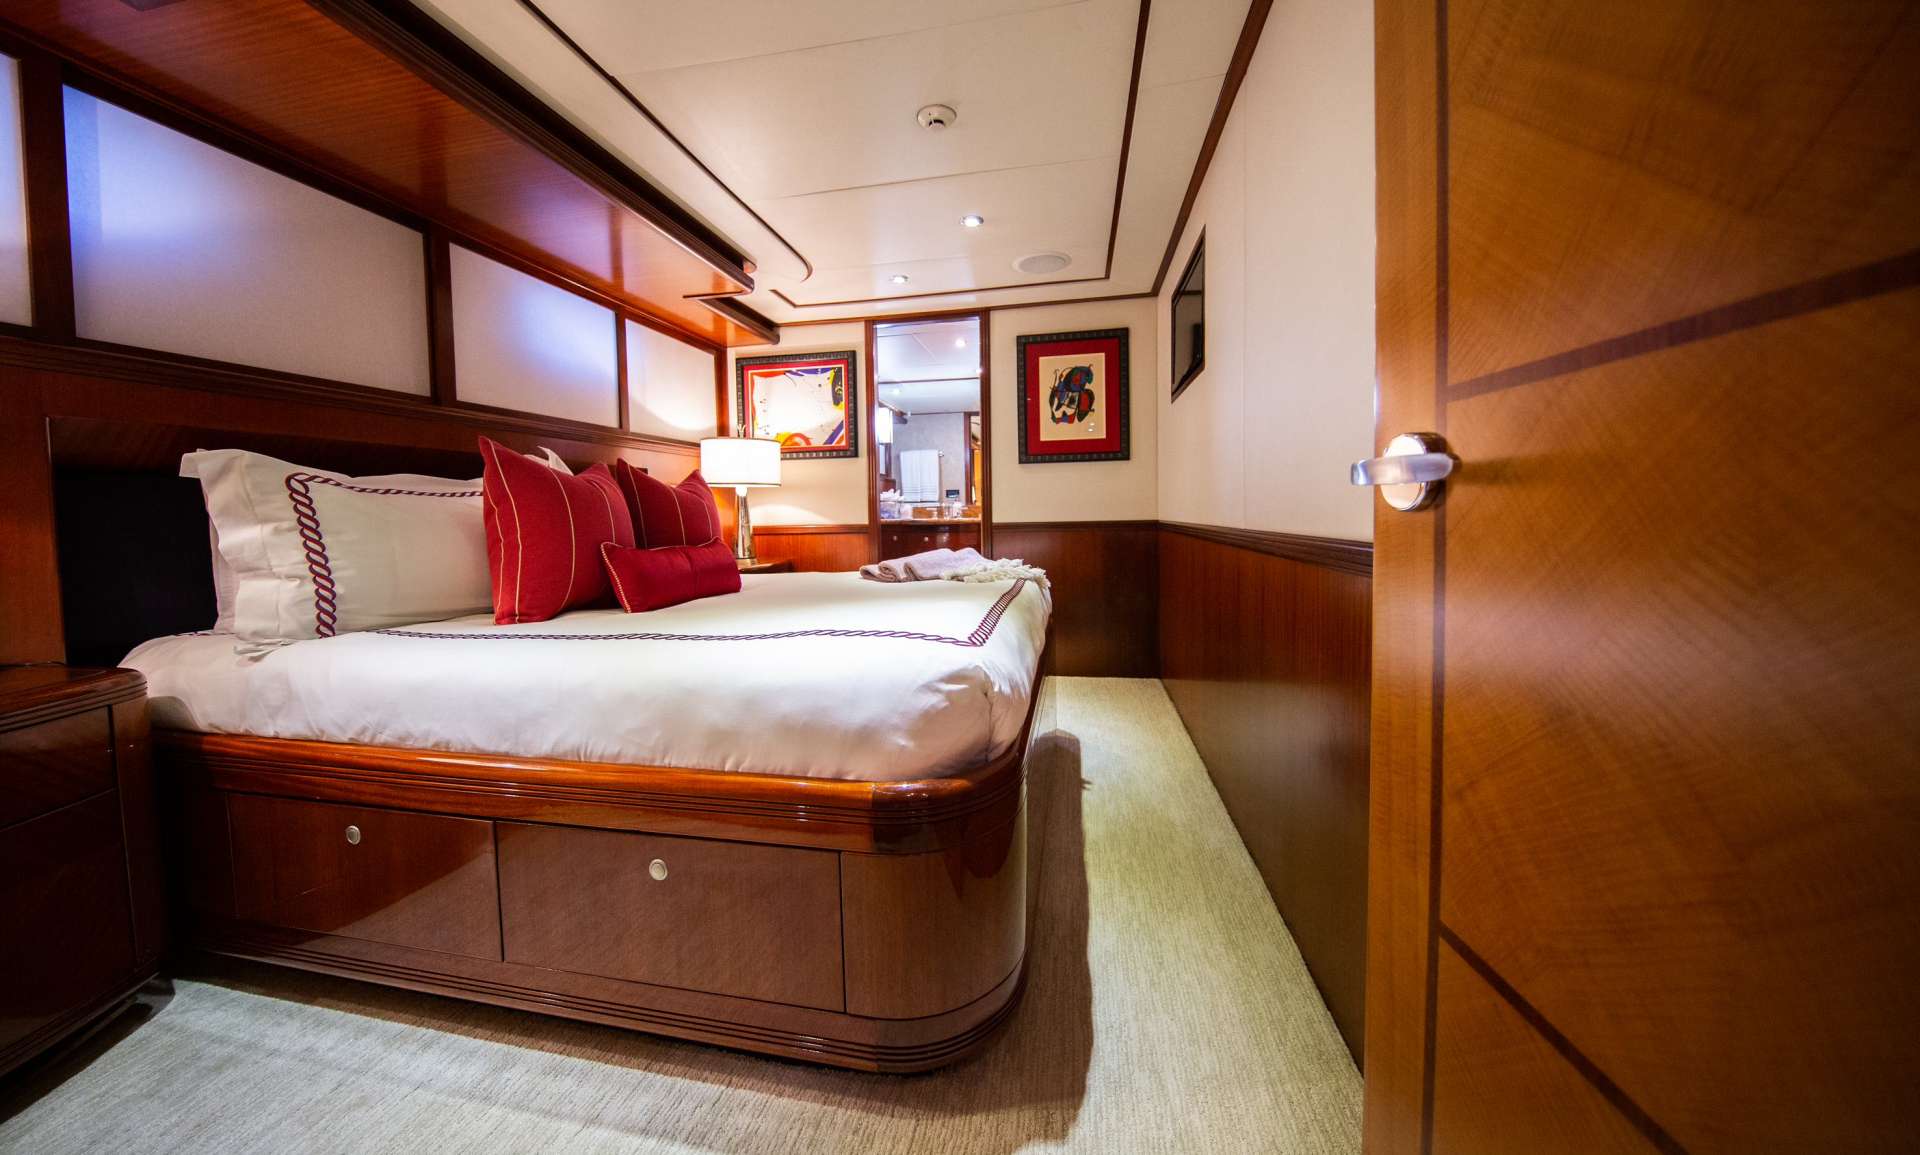 Motor Yacht 'JUST ENOUGH' Guest Stateroom, 11 PAX, 9 Crew, 141.00 Ft, 43.00 Meters, Built 2012, ., Refit Year 2018